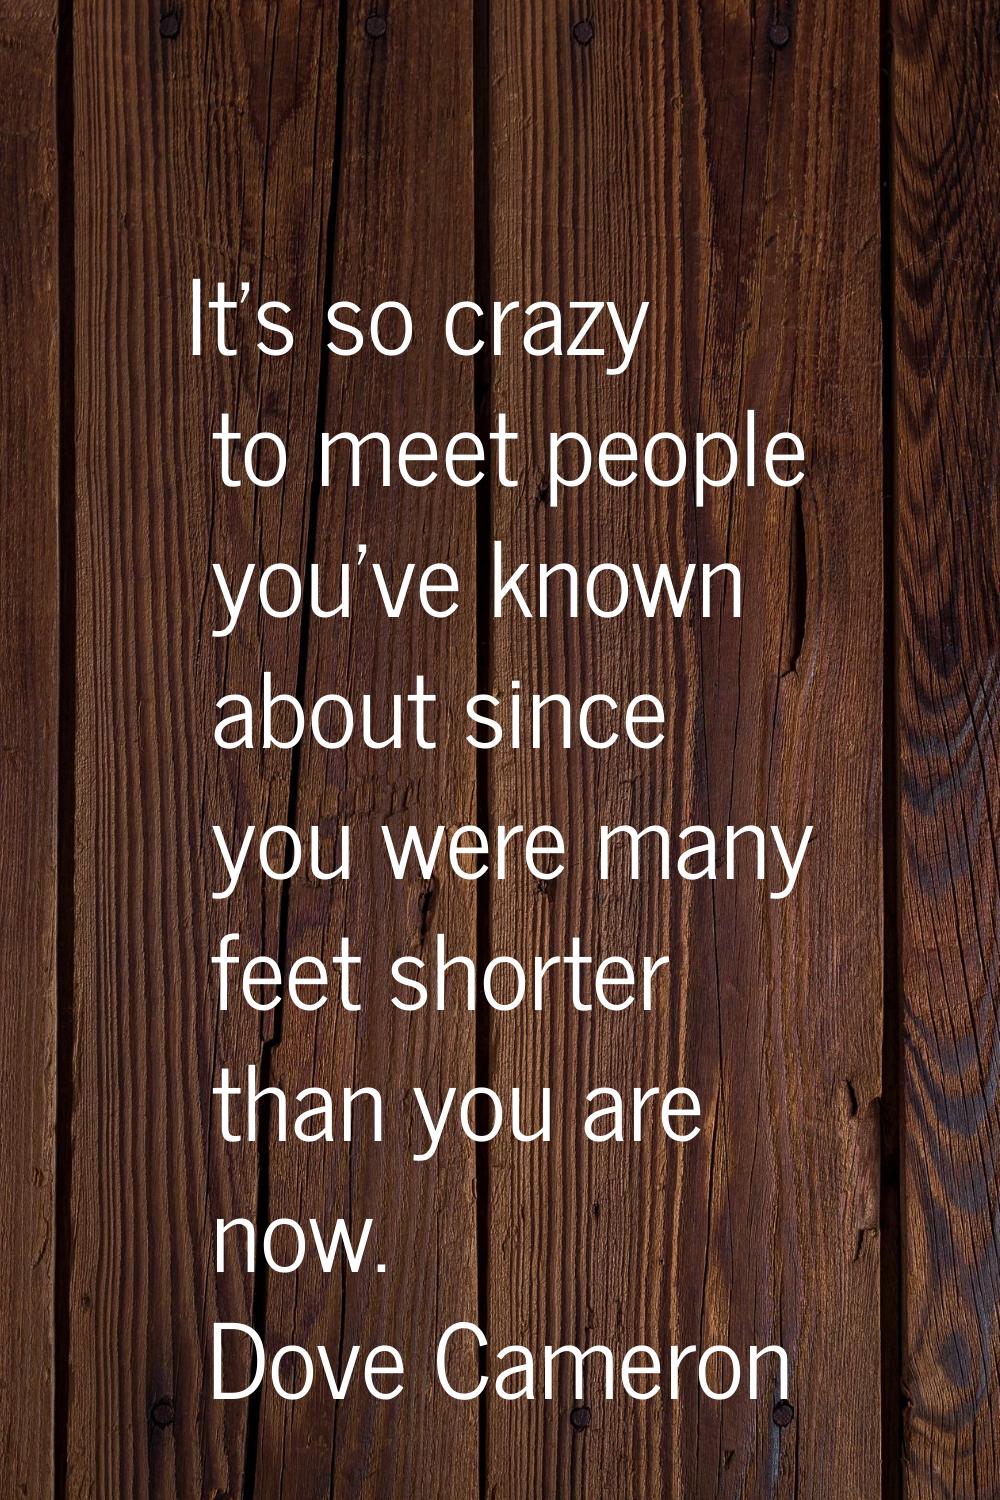 It's so crazy to meet people you've known about since you were many feet shorter than you are now.